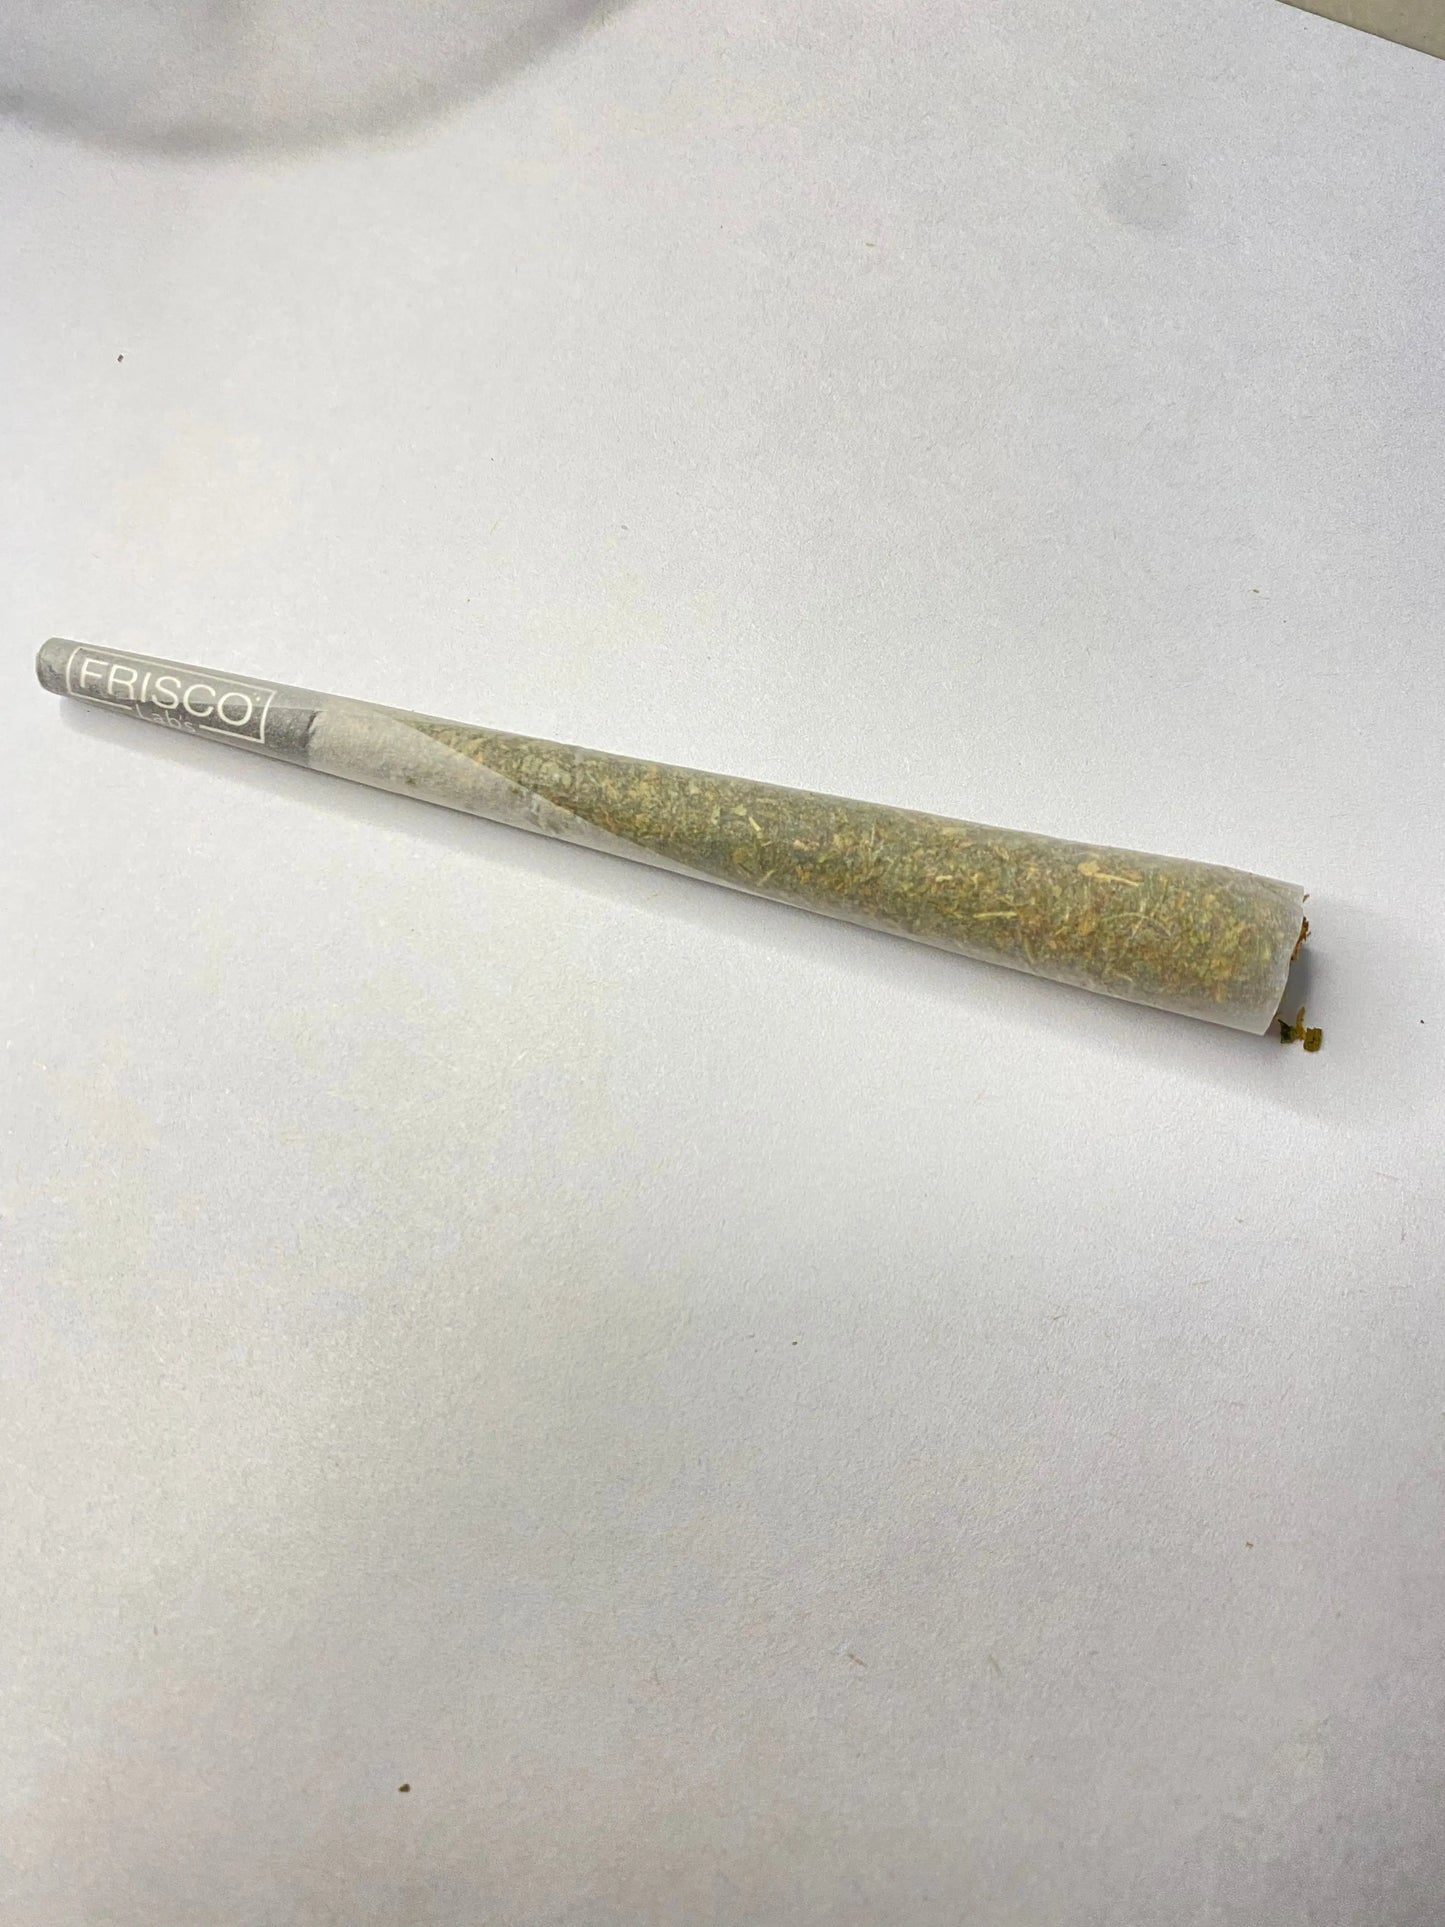 CONE JOINTS - CBD PRE-ROLLED - KING CONE - JOINTS Fire Og - Frisco Labs